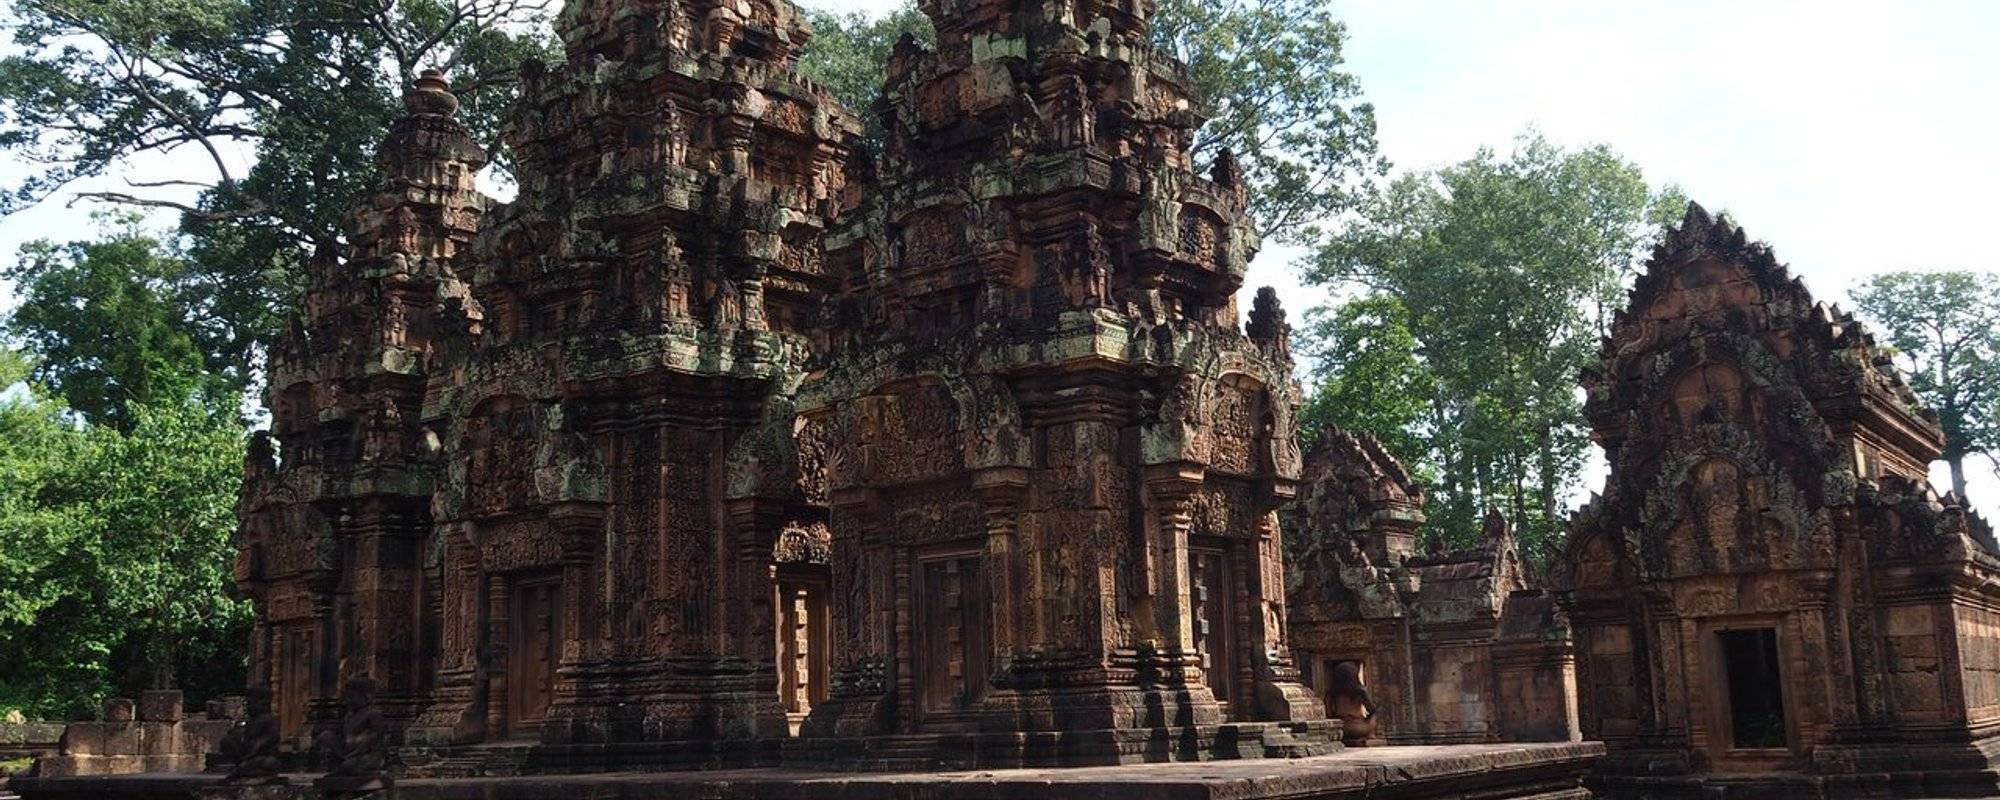 Lord Nigel's Travels - Cambodia - Siem Reap Temples